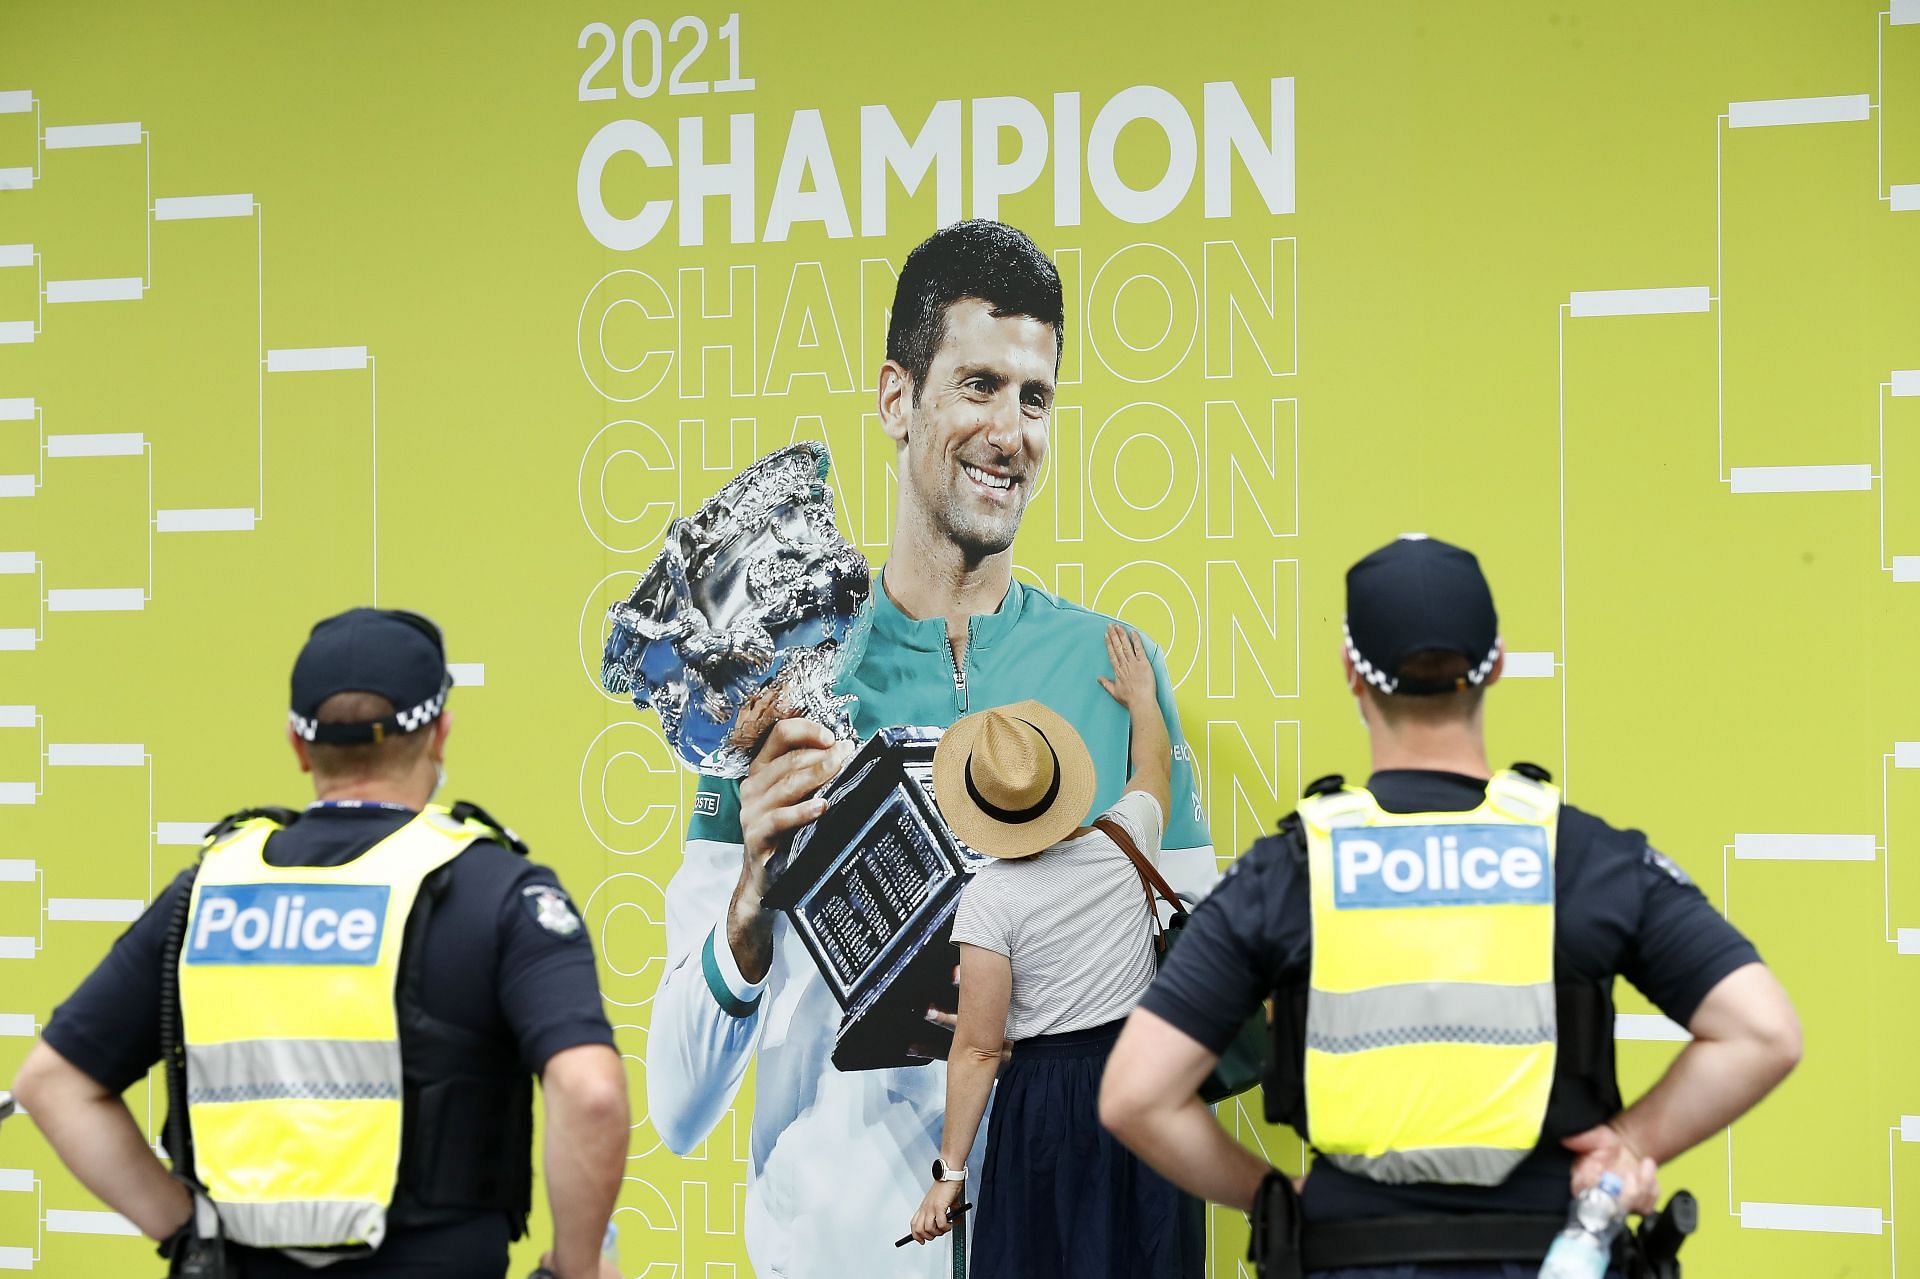 Novak Djokovic was deported from Australia earlier this year.